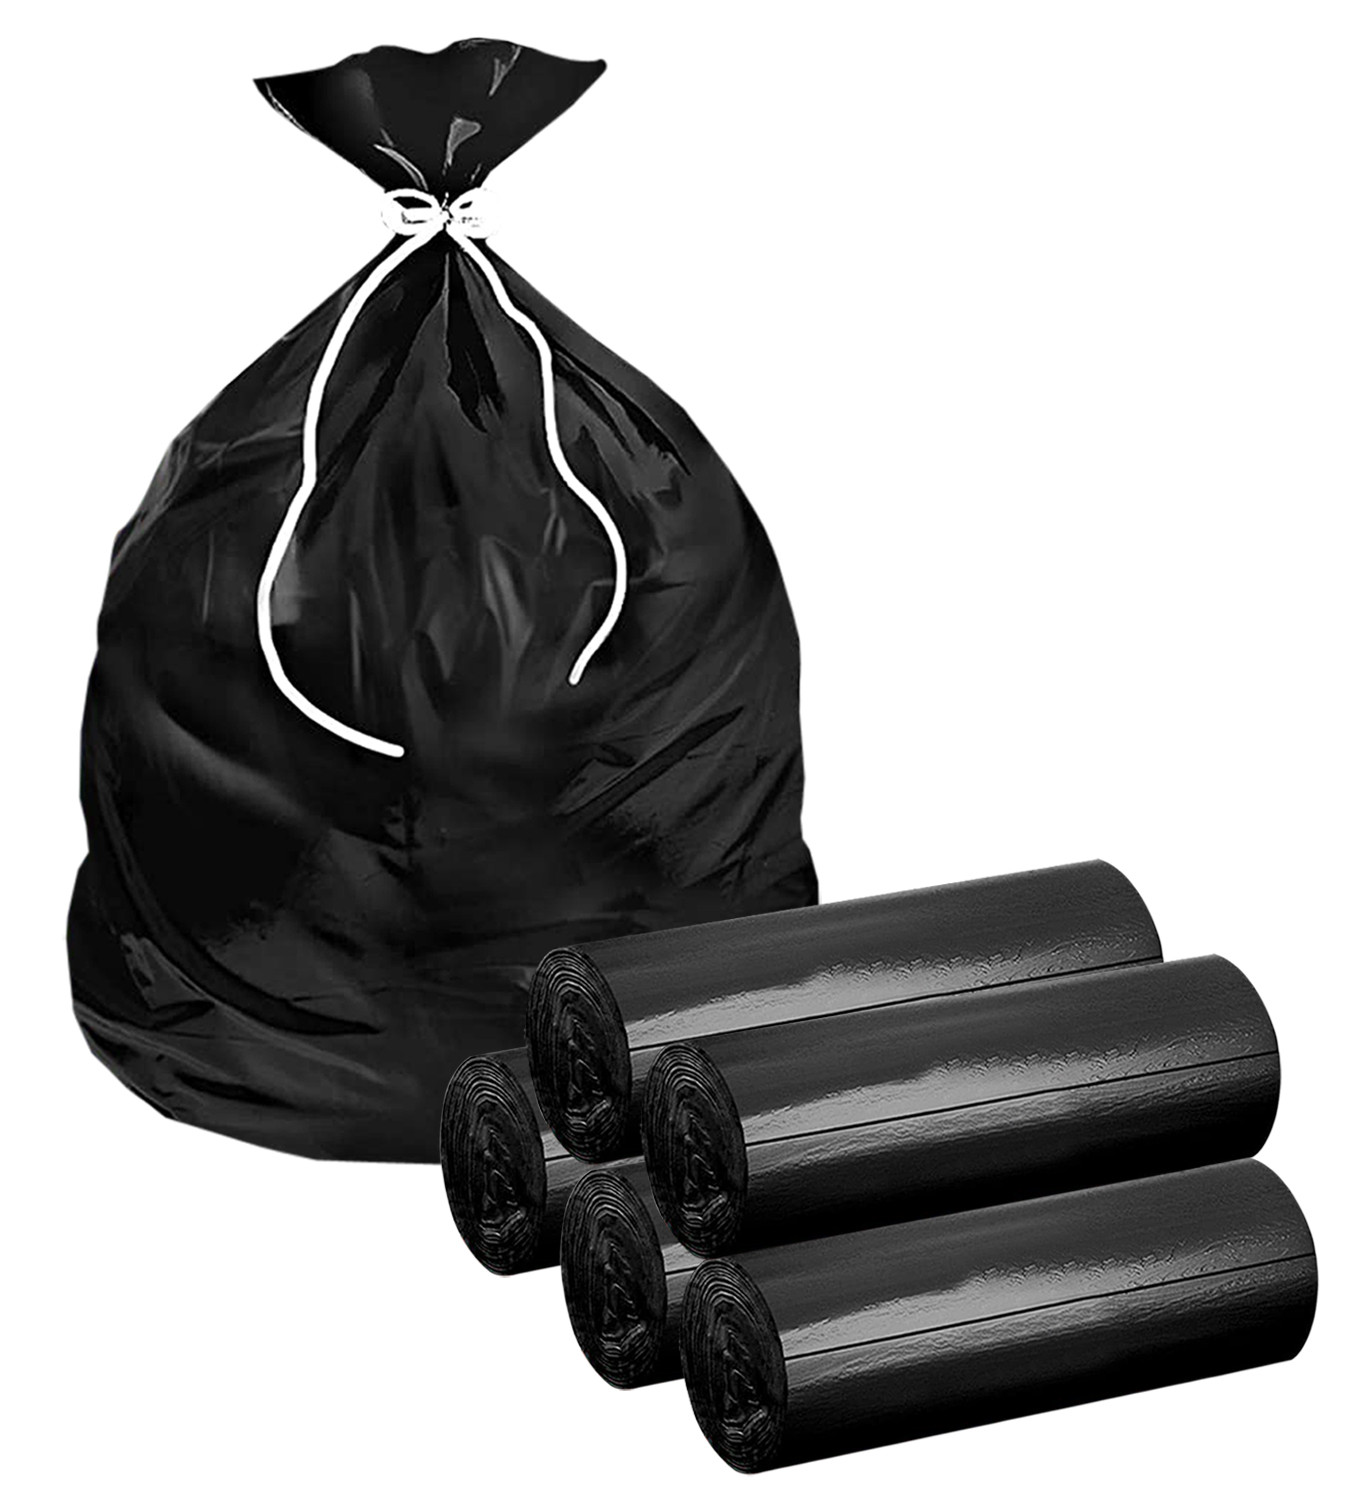 Kuber Industries Medium Biodegradable Garbage Bags, Dustbin Bags, Trash Bags For Kitchen, Office, Warehouse, Pantry or Washroom, 19x21 Inches (Black)-HS41KUBMART24020